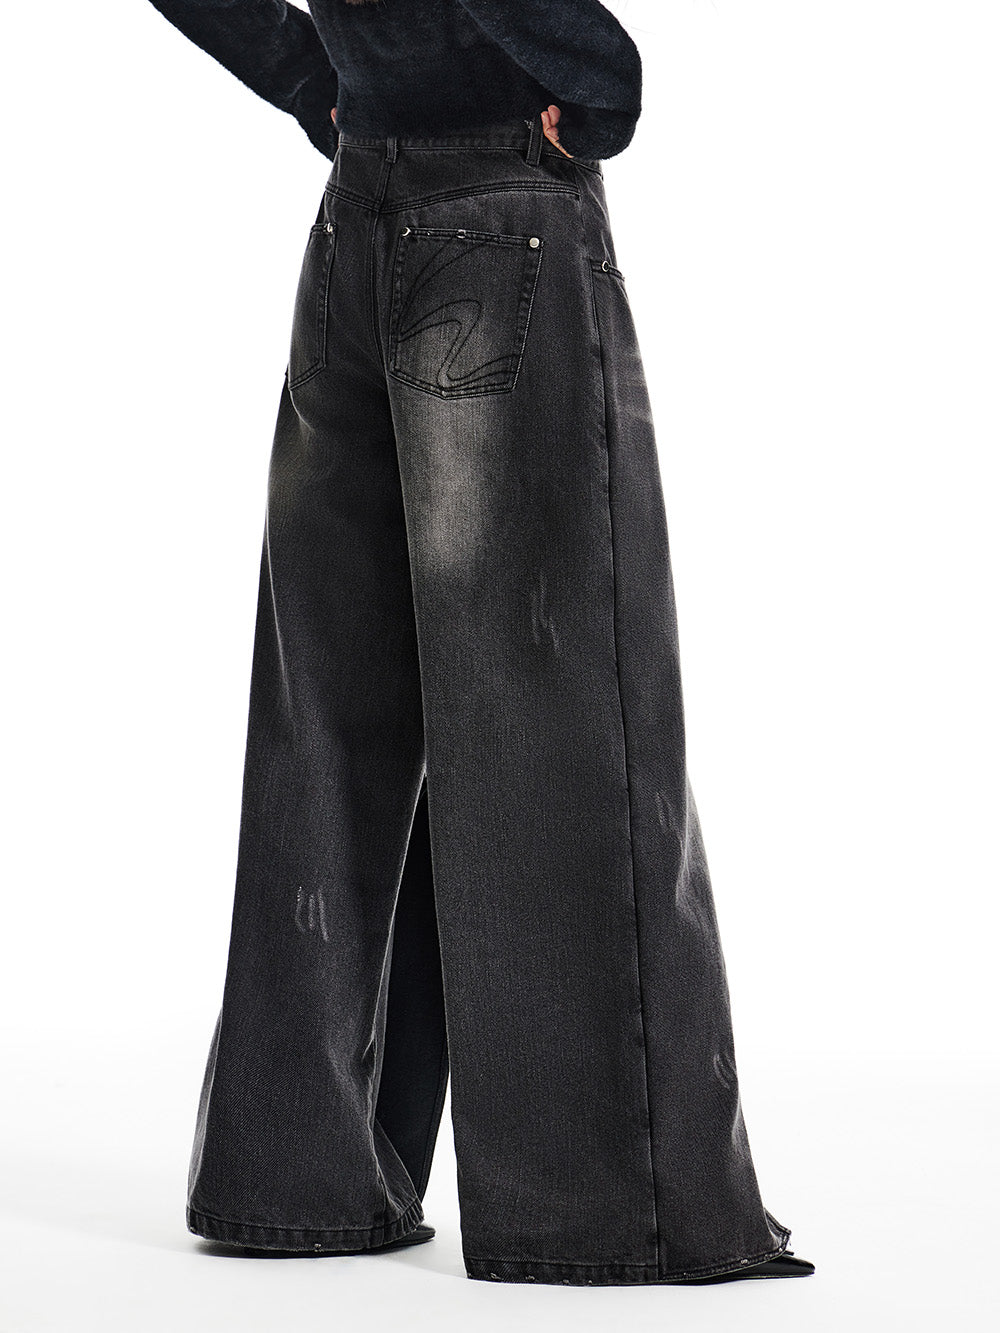 MUKTANK x WESAME LAB New Washed Grey Distressed Wide-Leg Jeans